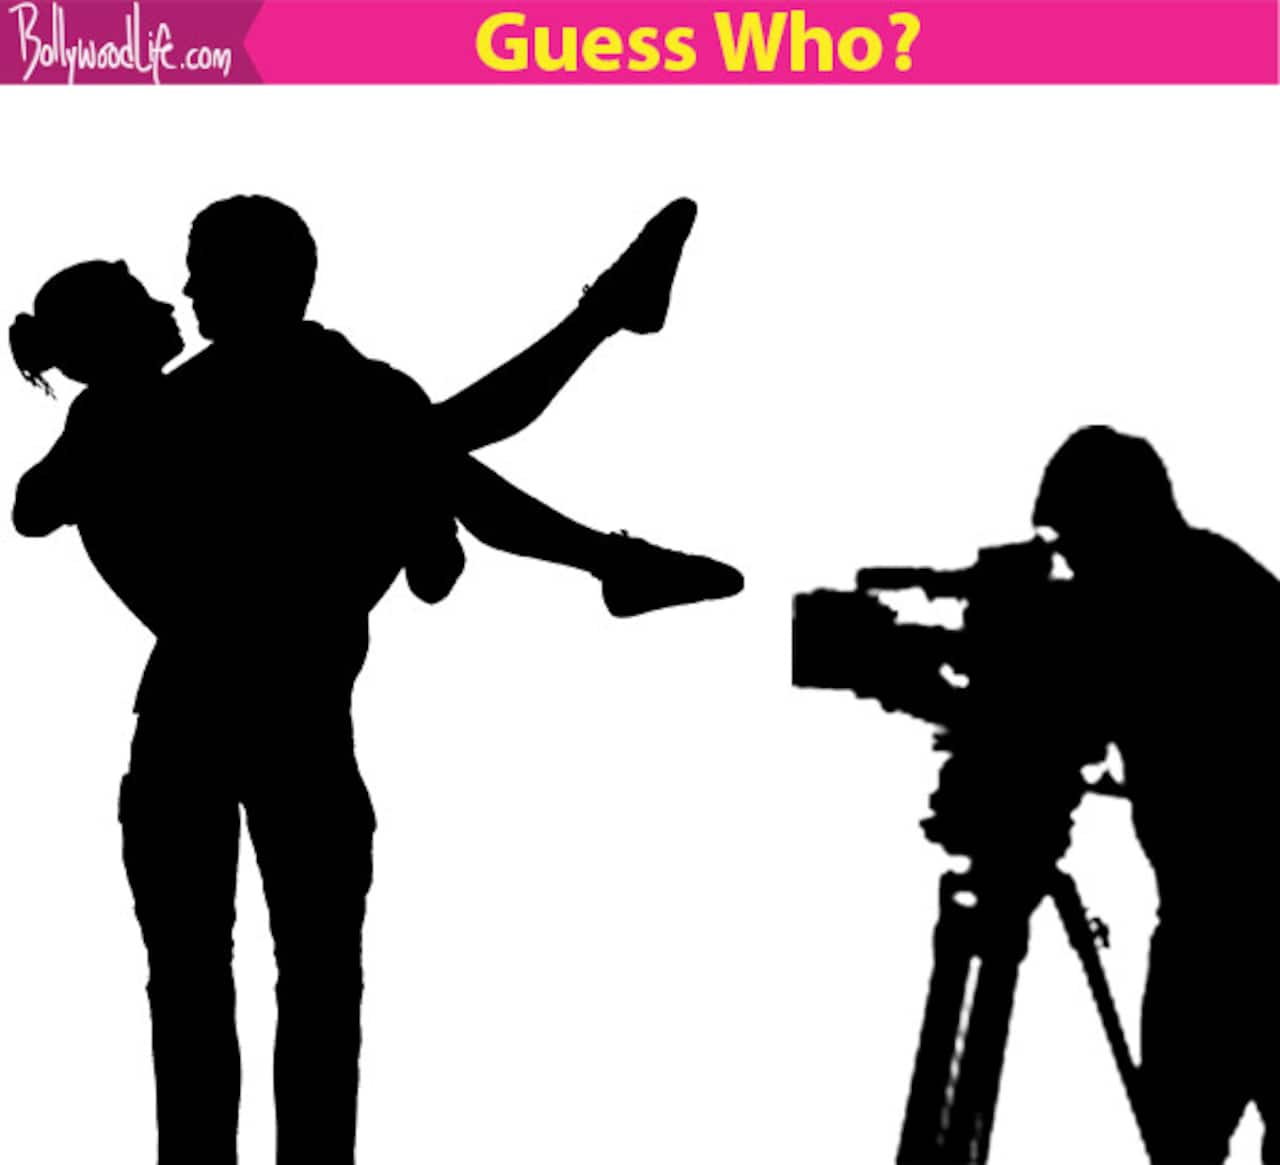 This actress' HOT photshoot with her co-star is going to set tongues wagging!